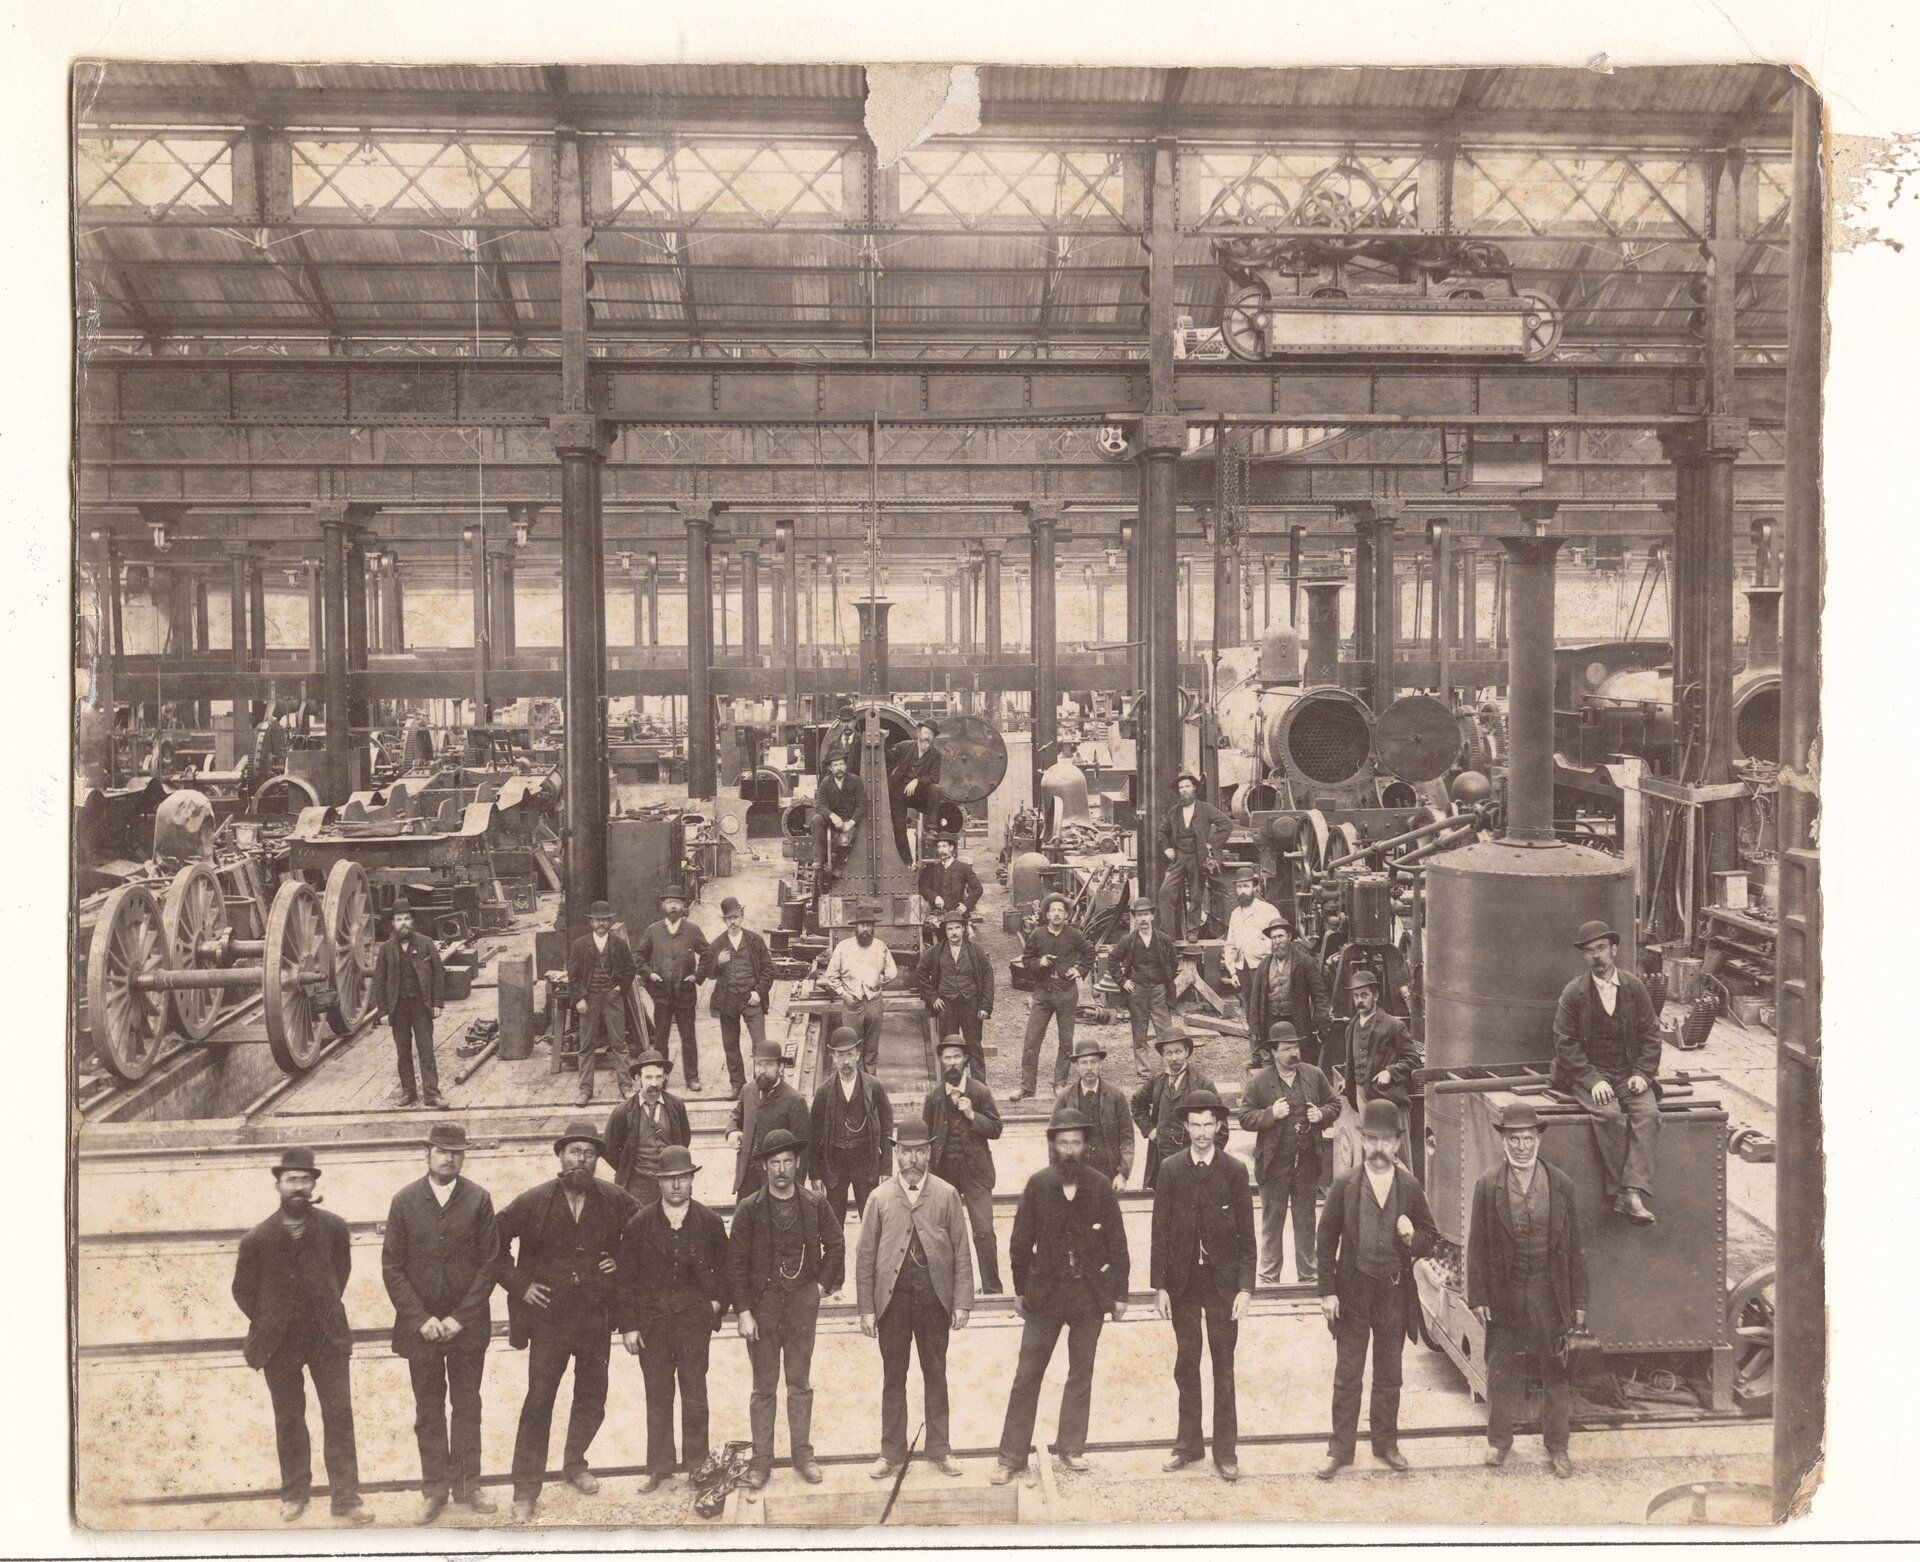 Railway workers at Eveleigh Workshops in 1889